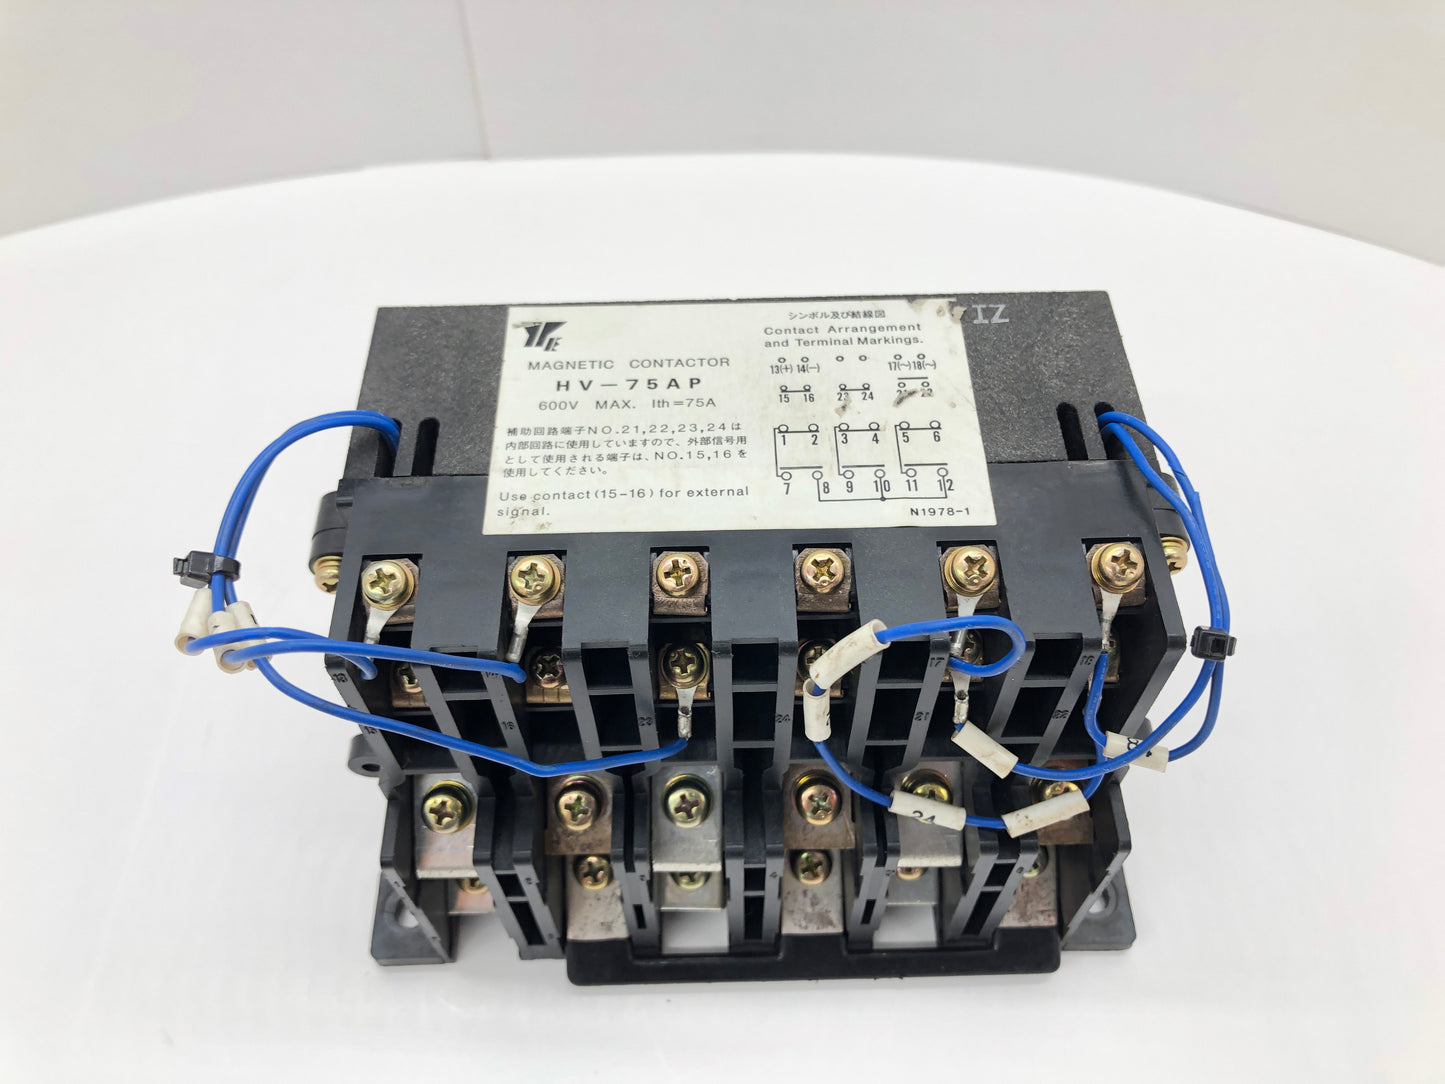 Yaskawa HV-75AP Magnetic Contactor 600V 75 Amp - Reconditioned